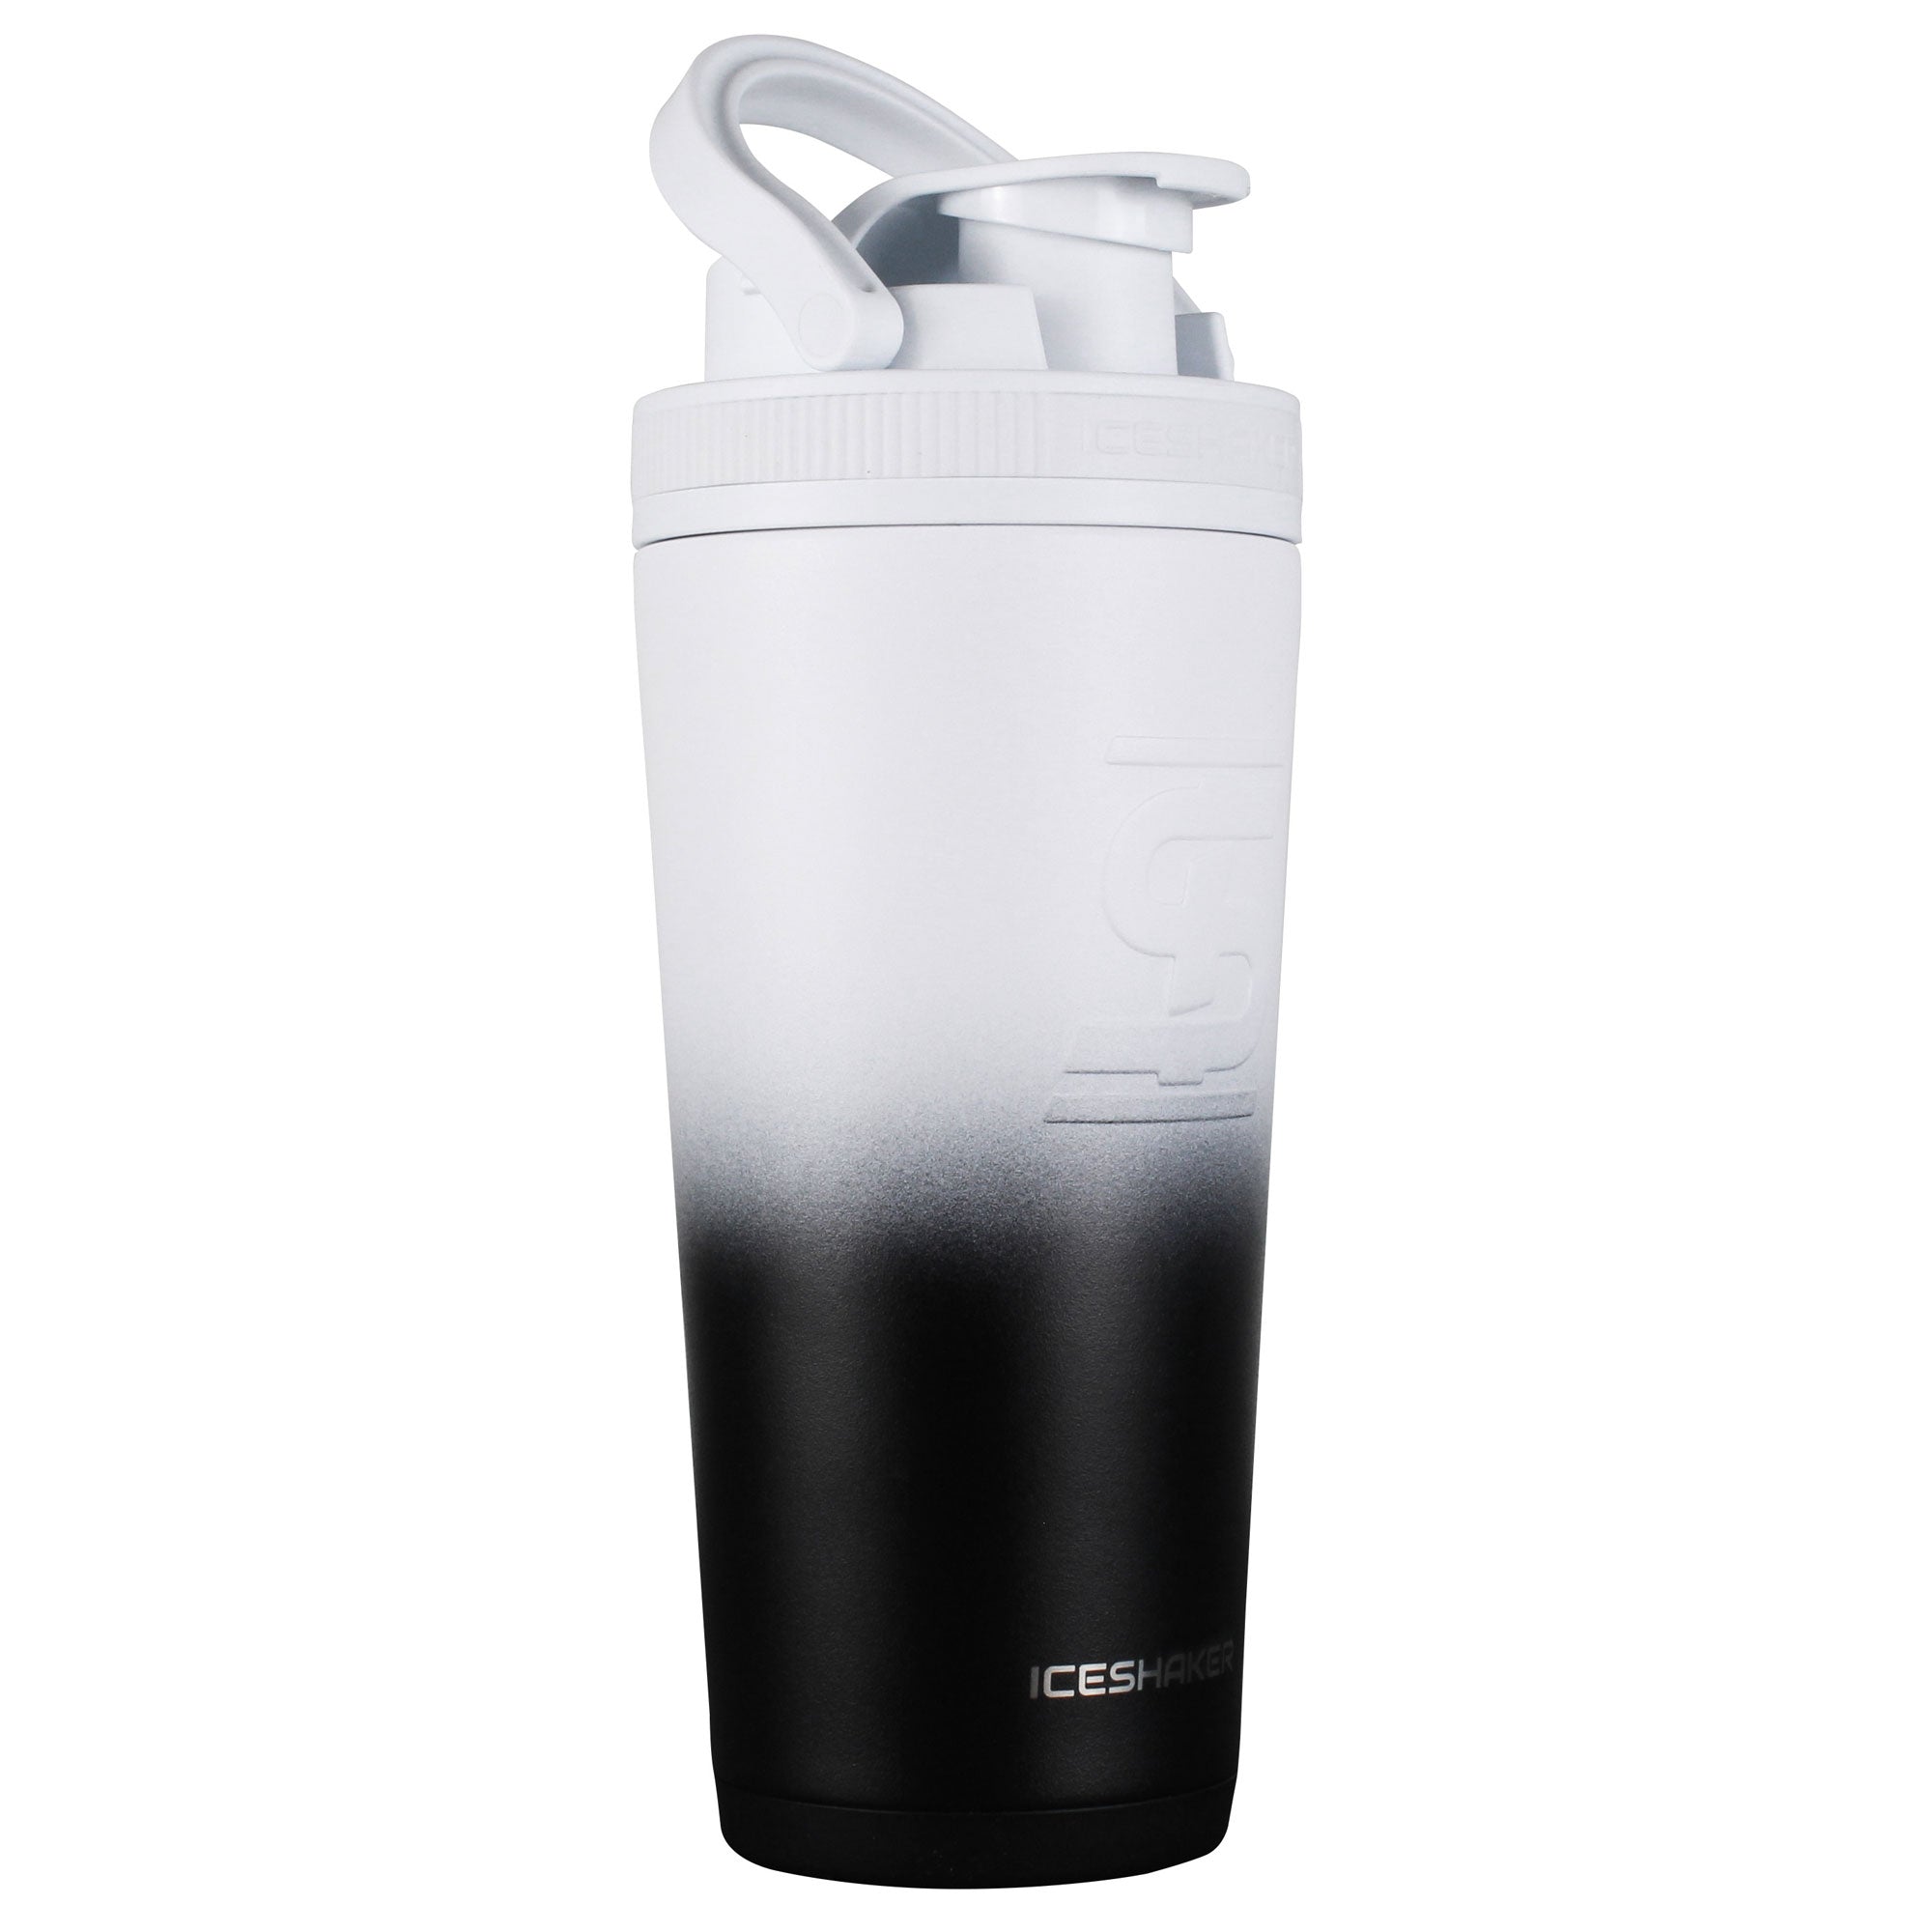 Ice Shaker 26oz Bottle with Flex Lid - Red/Black Ombre